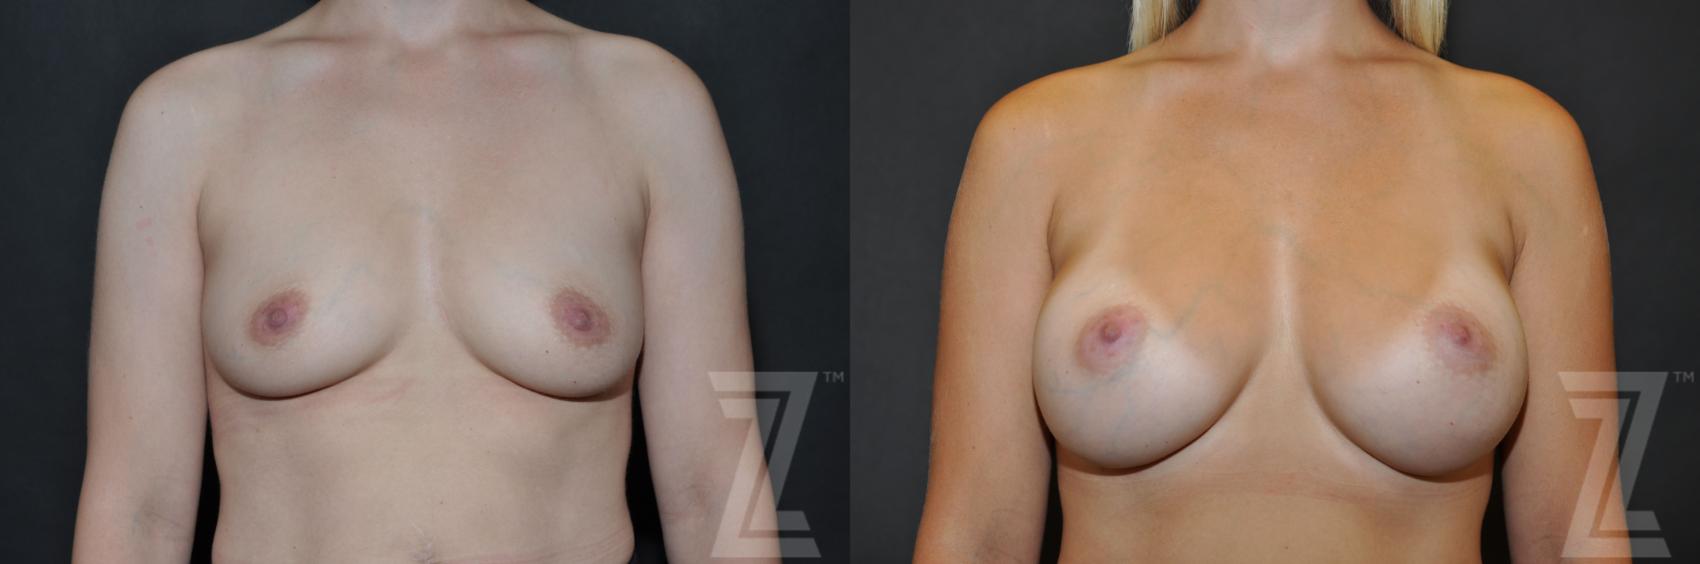 Breast Augmentation Before & After Photo | Austin, TX | The Piazza Center for Plastic Surgery & Advanced Skin Care